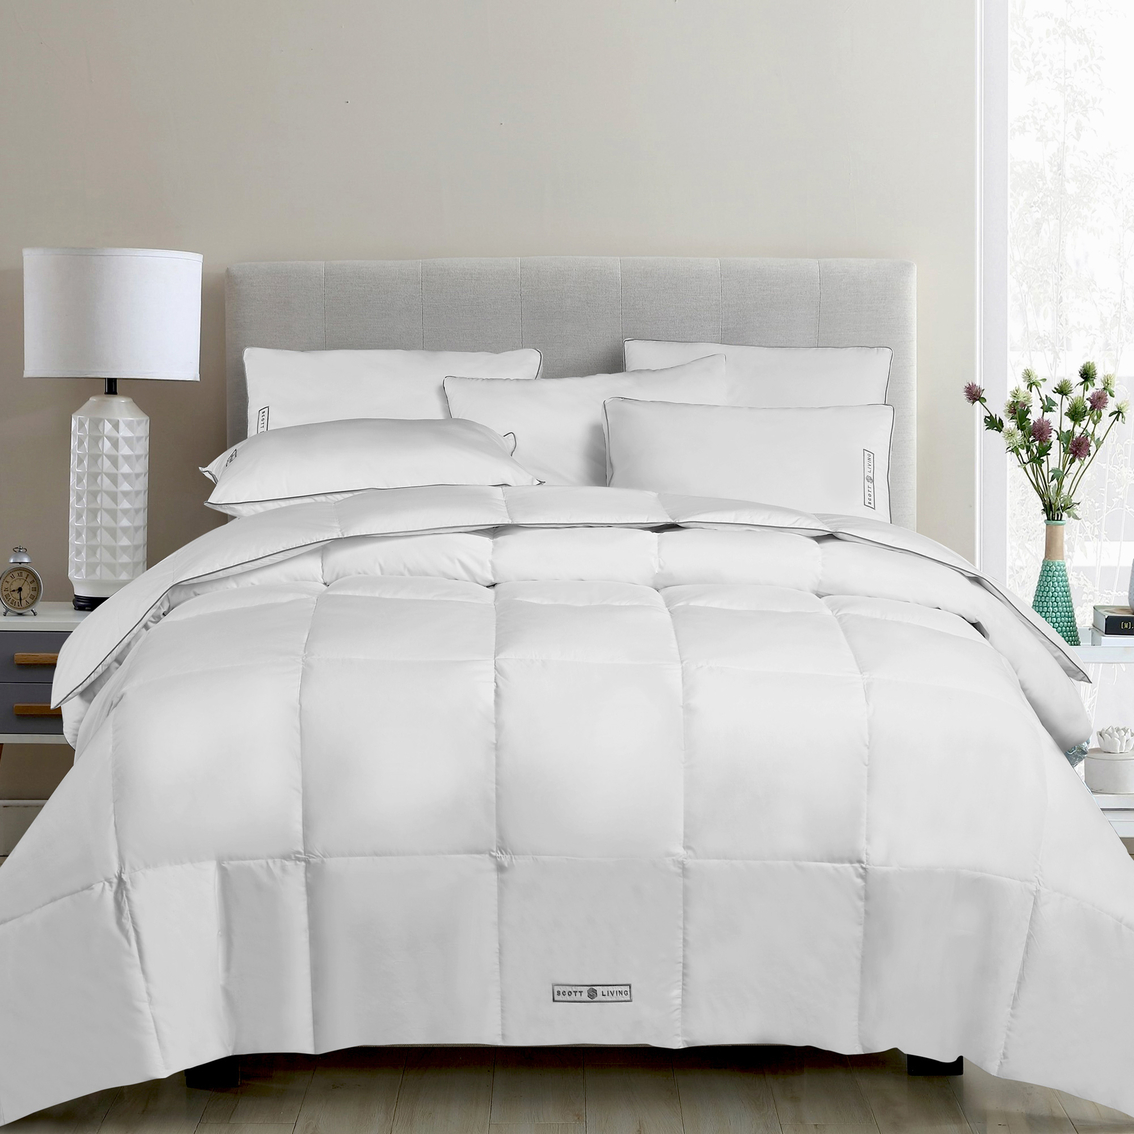 Scott Living 233tc Cotton Down Fiber All Seasons to Extra Warmth Comforter - Image 2 of 3